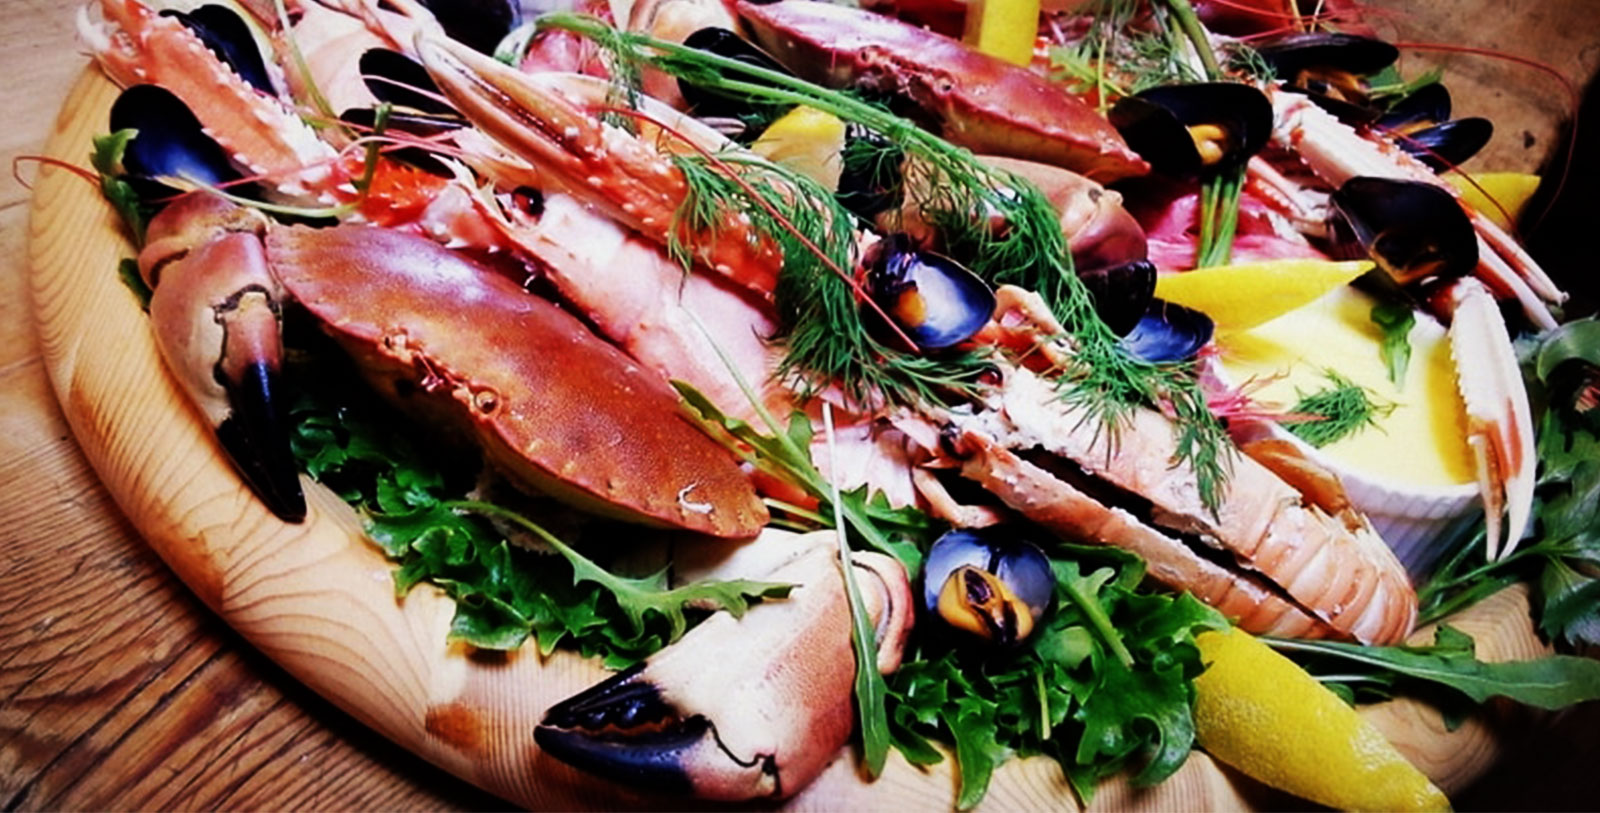 Taste some seafood delicacies fresh from local Risør fishermen.